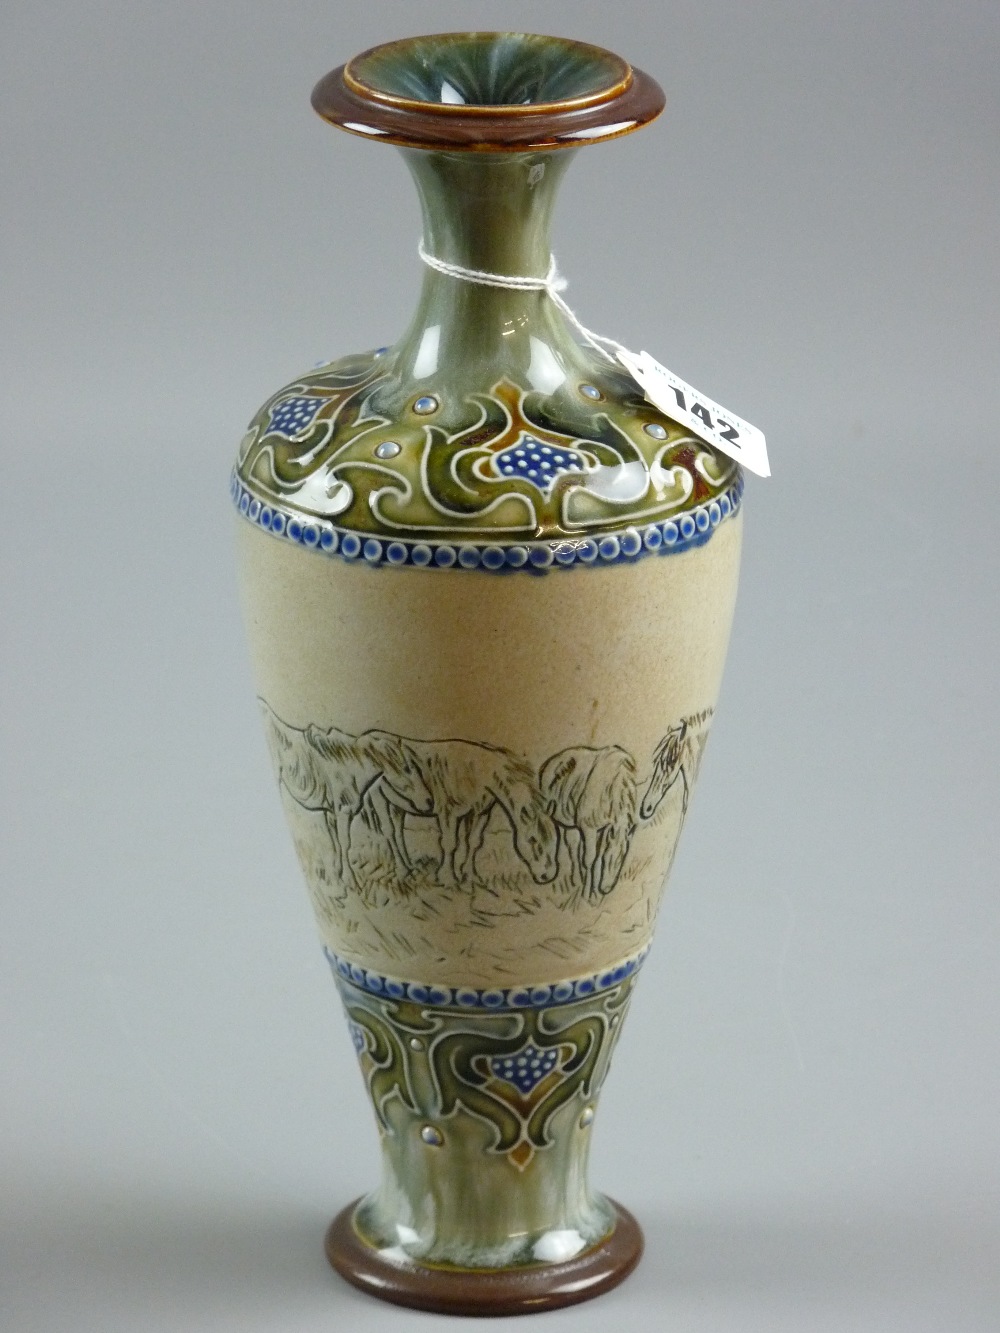 Hannah Barlow - a Royal Doulton stoneware, sgraffito decorated with a central band of ponies on a